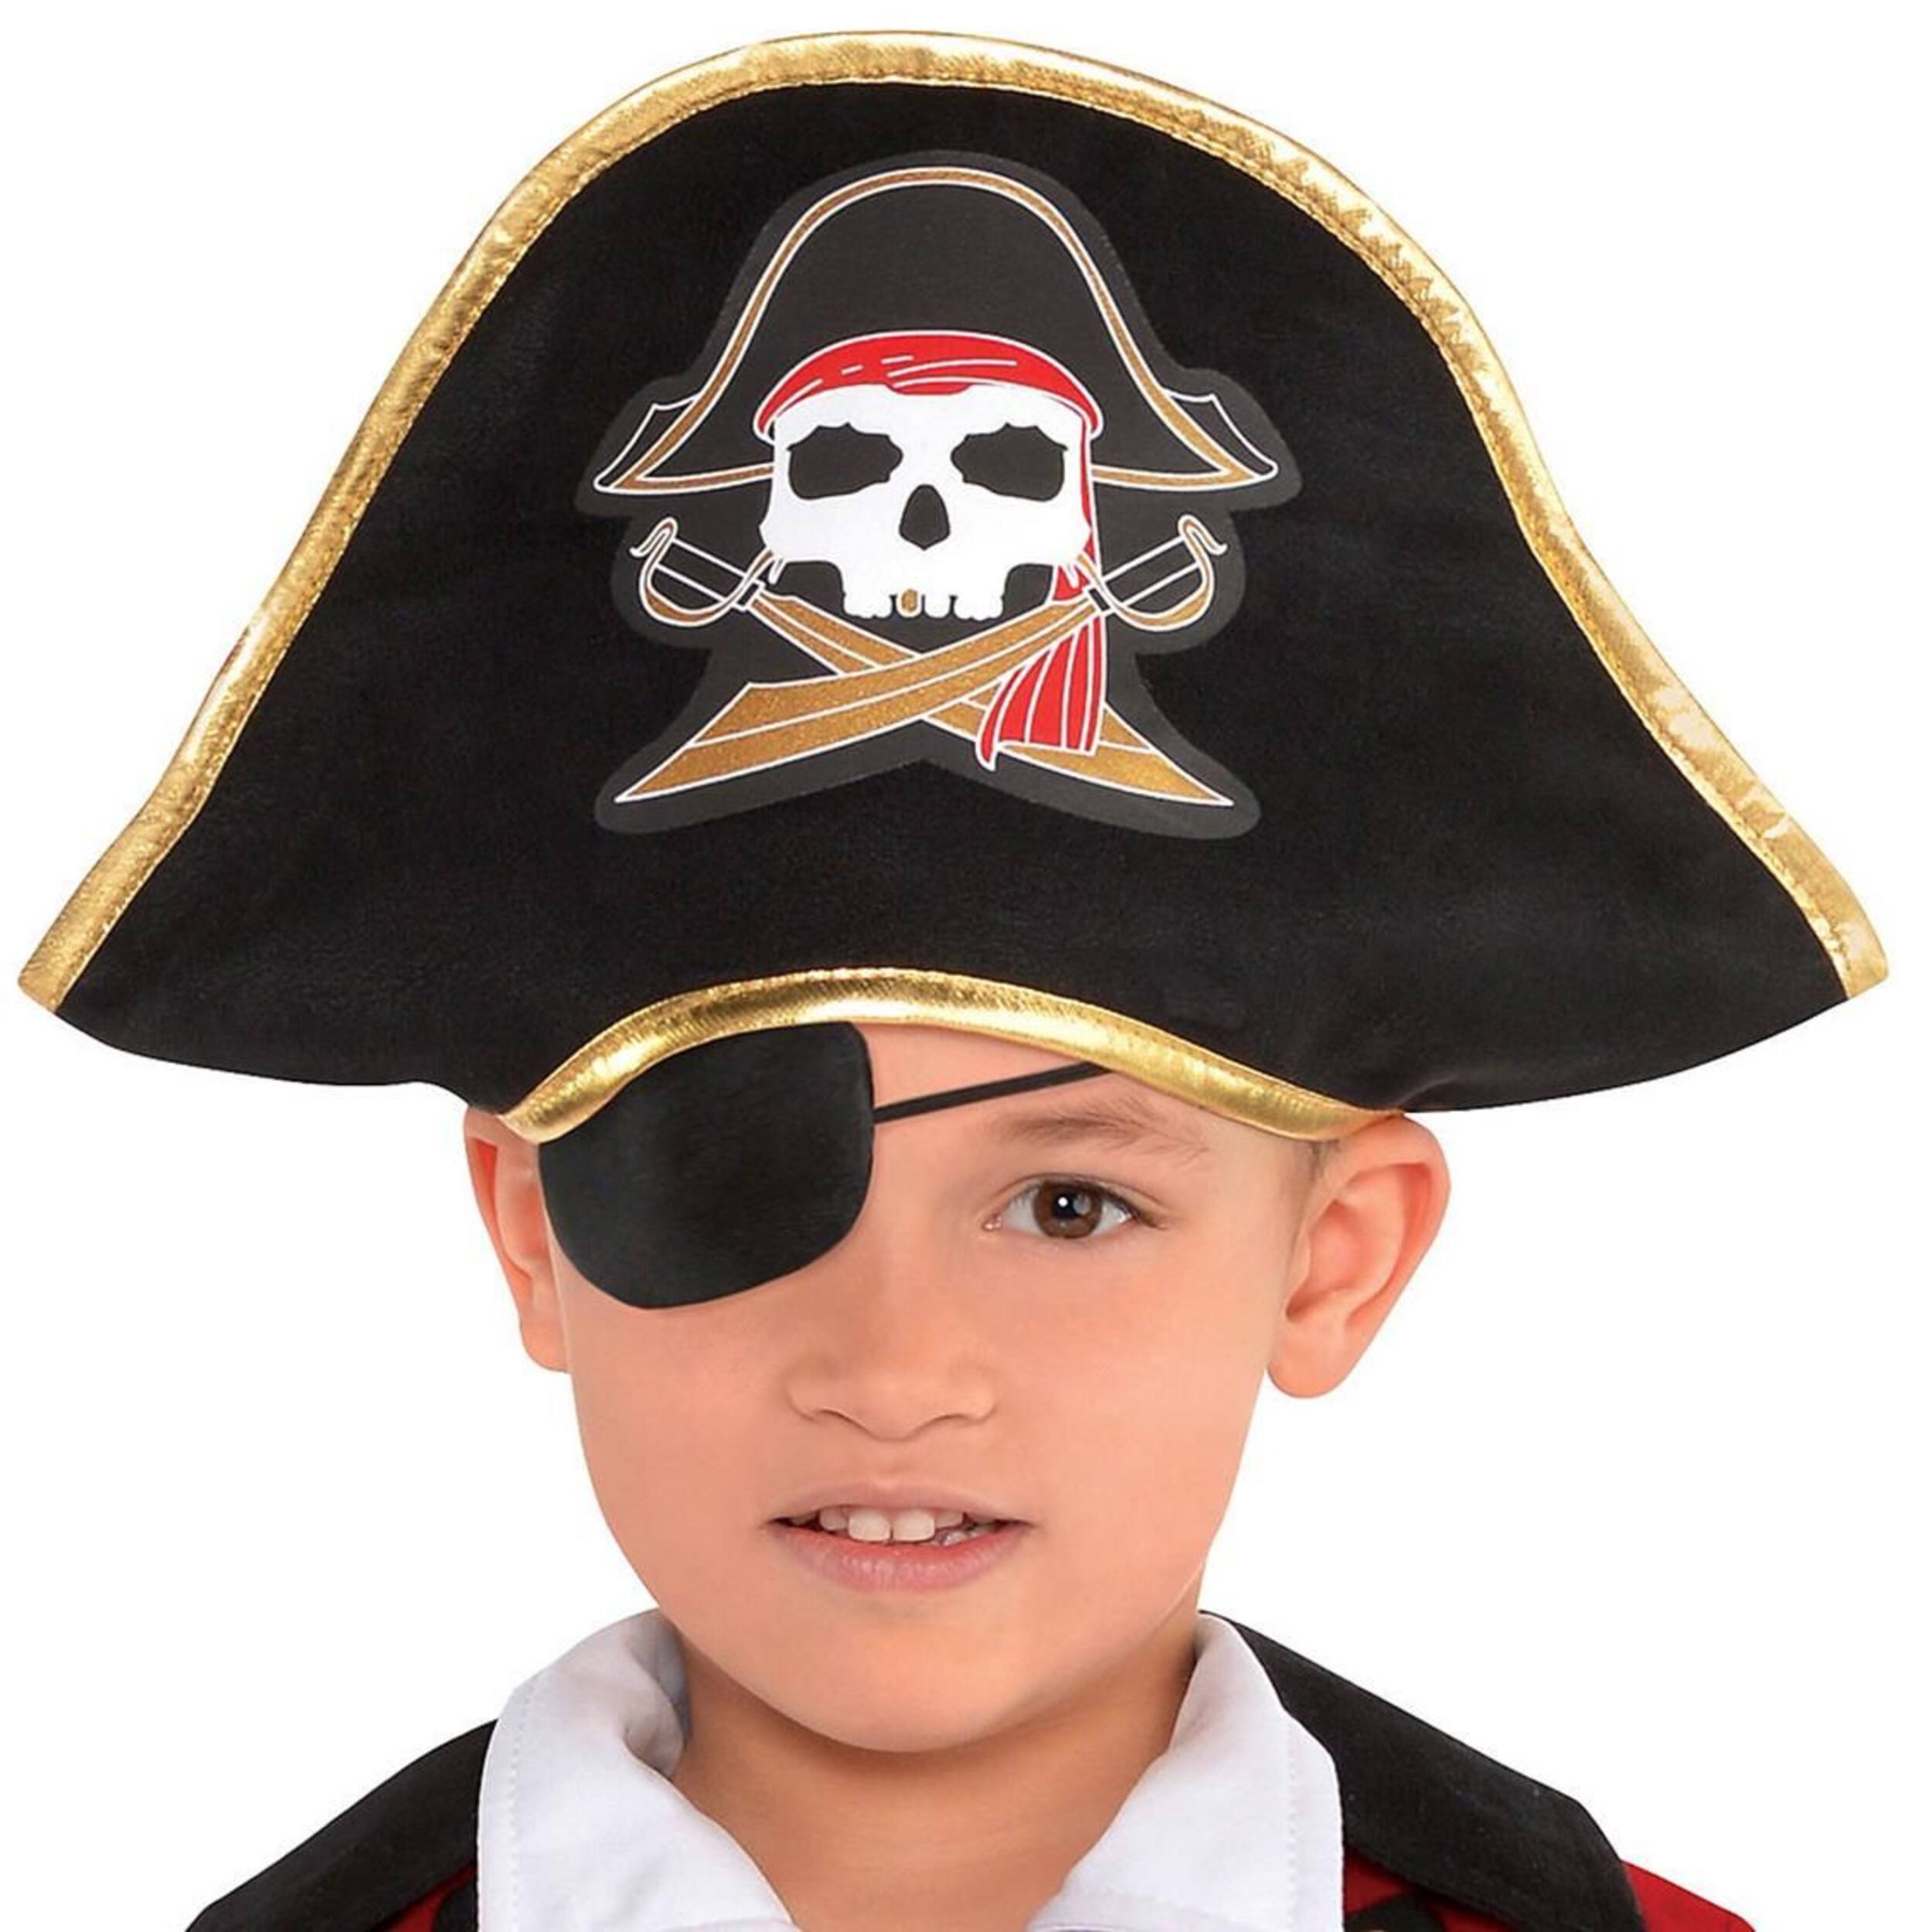 Kids' Pirate Black/Red Outfit with Jacket/Shirt/Pant/Hat/Boot Covers ...